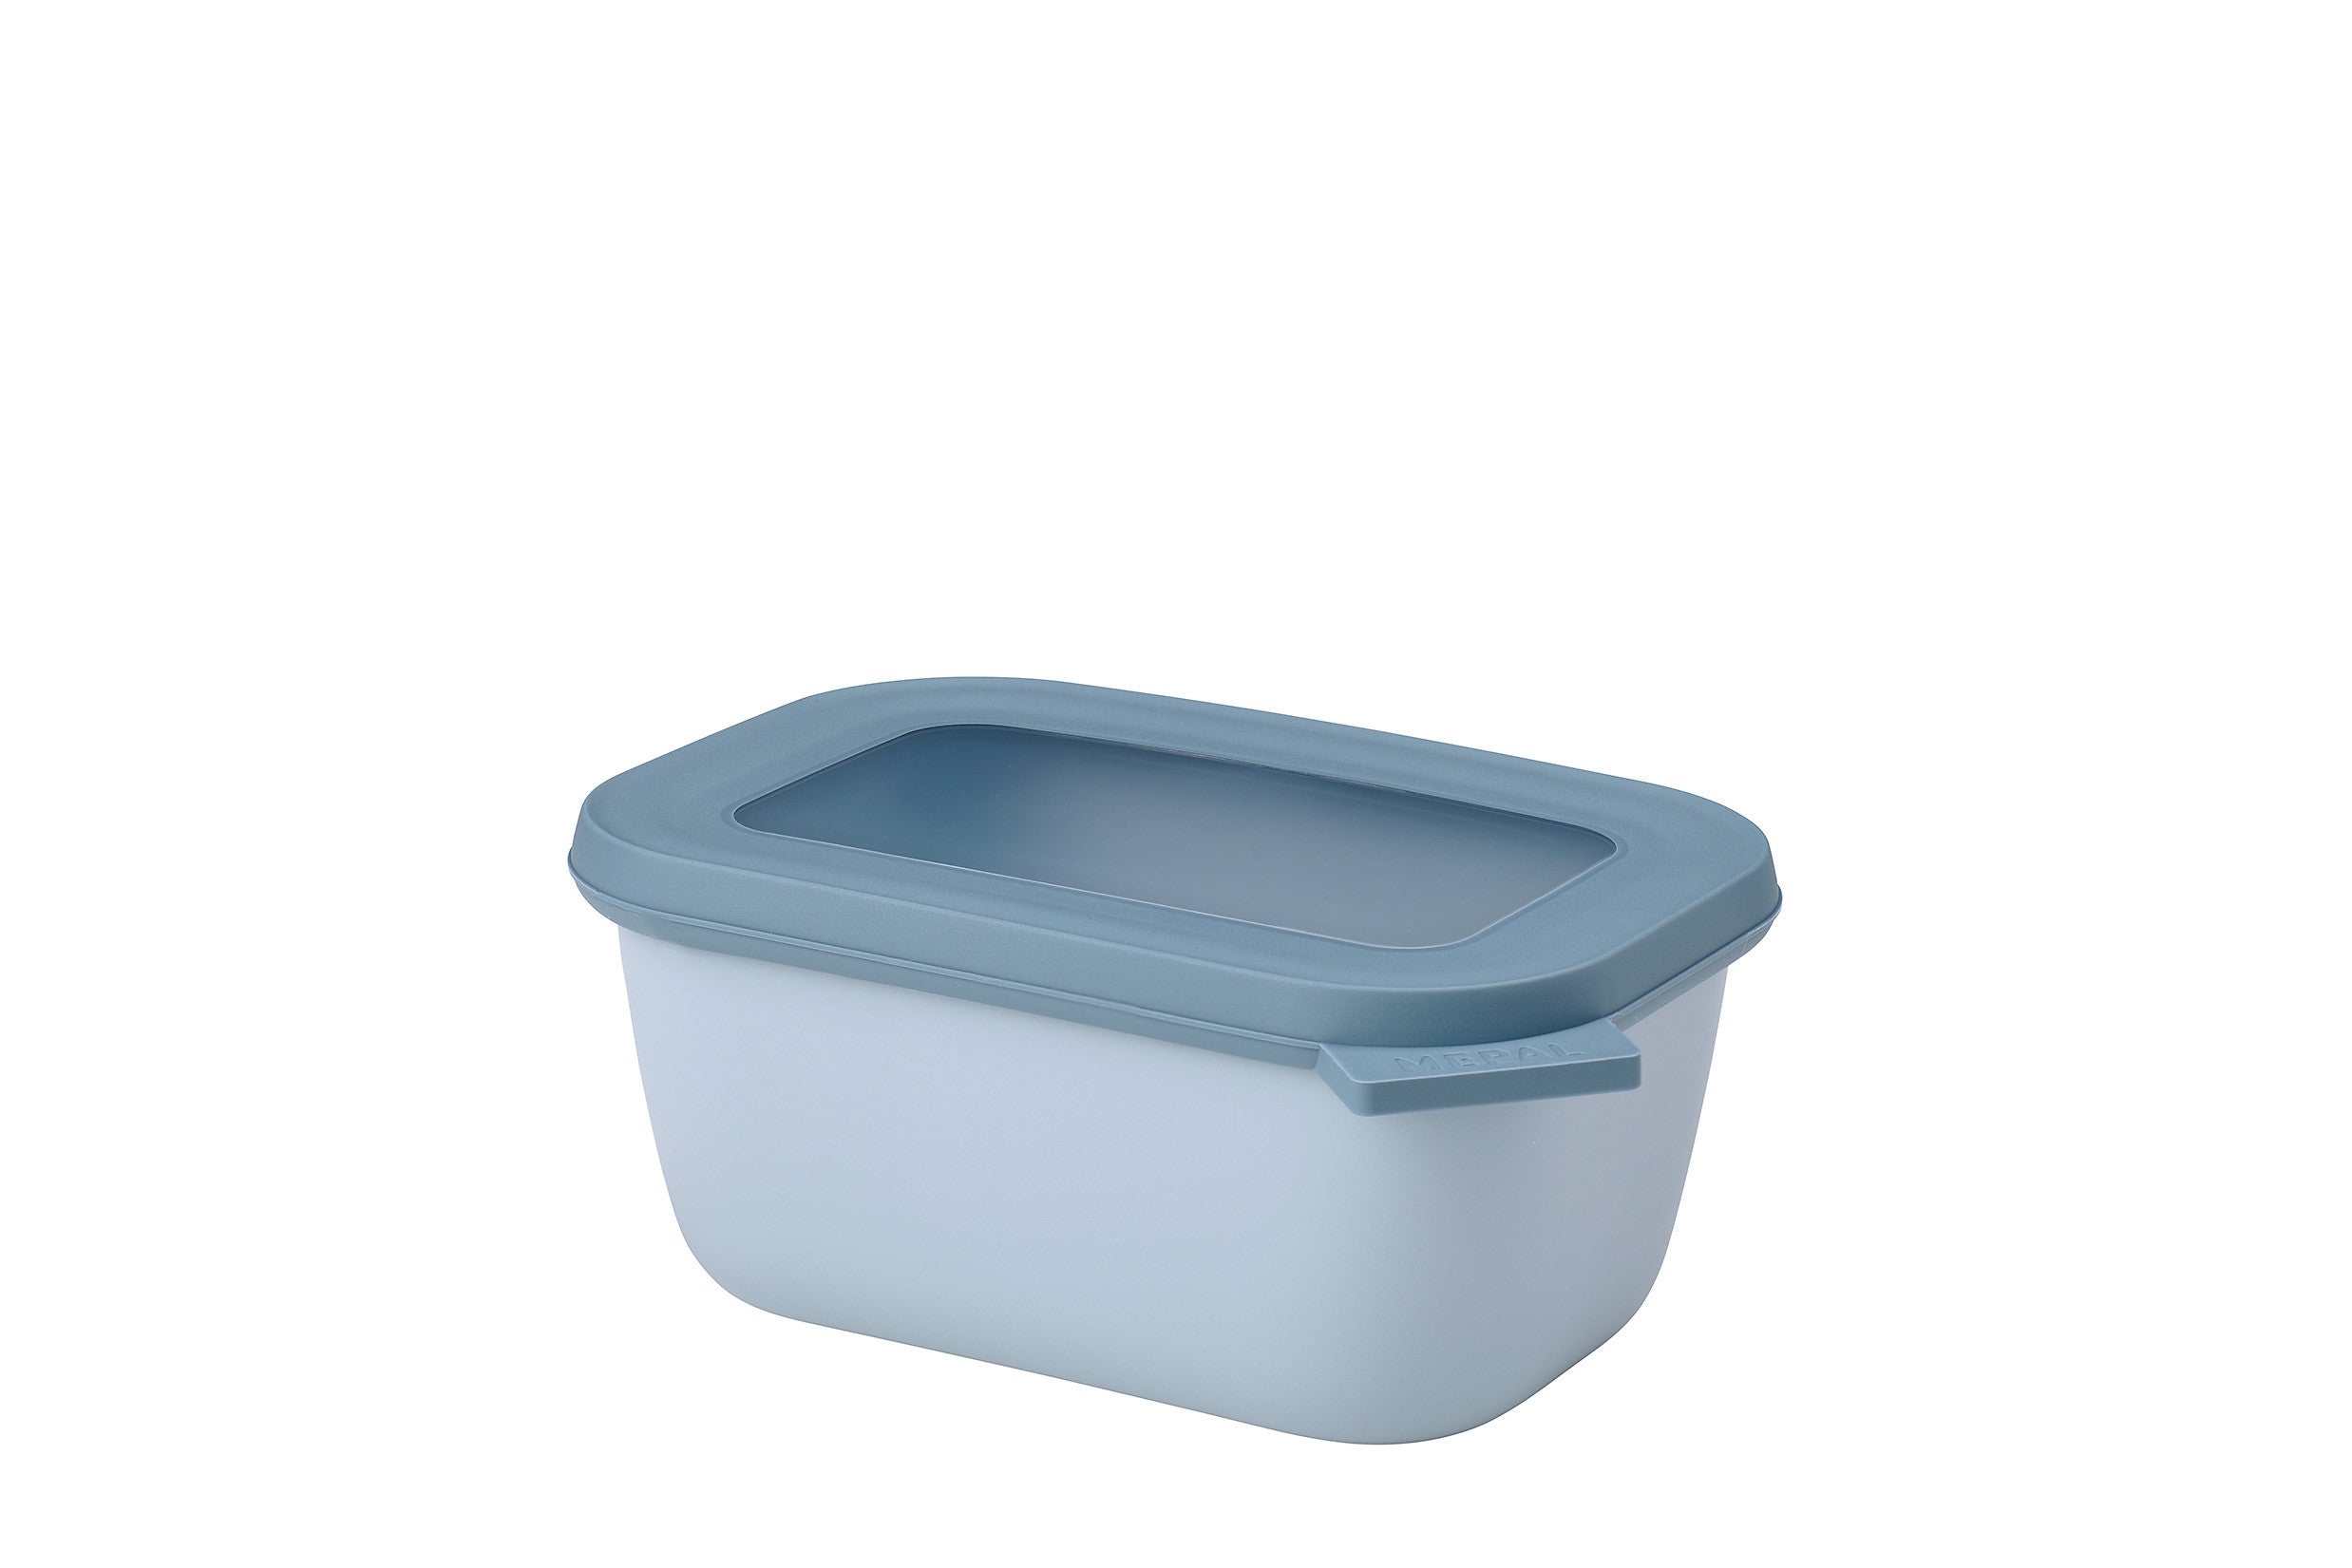 Cirqula 750mL Freezer Container Nordic Blue - KITCHEN - Food Containers - Soko and Co